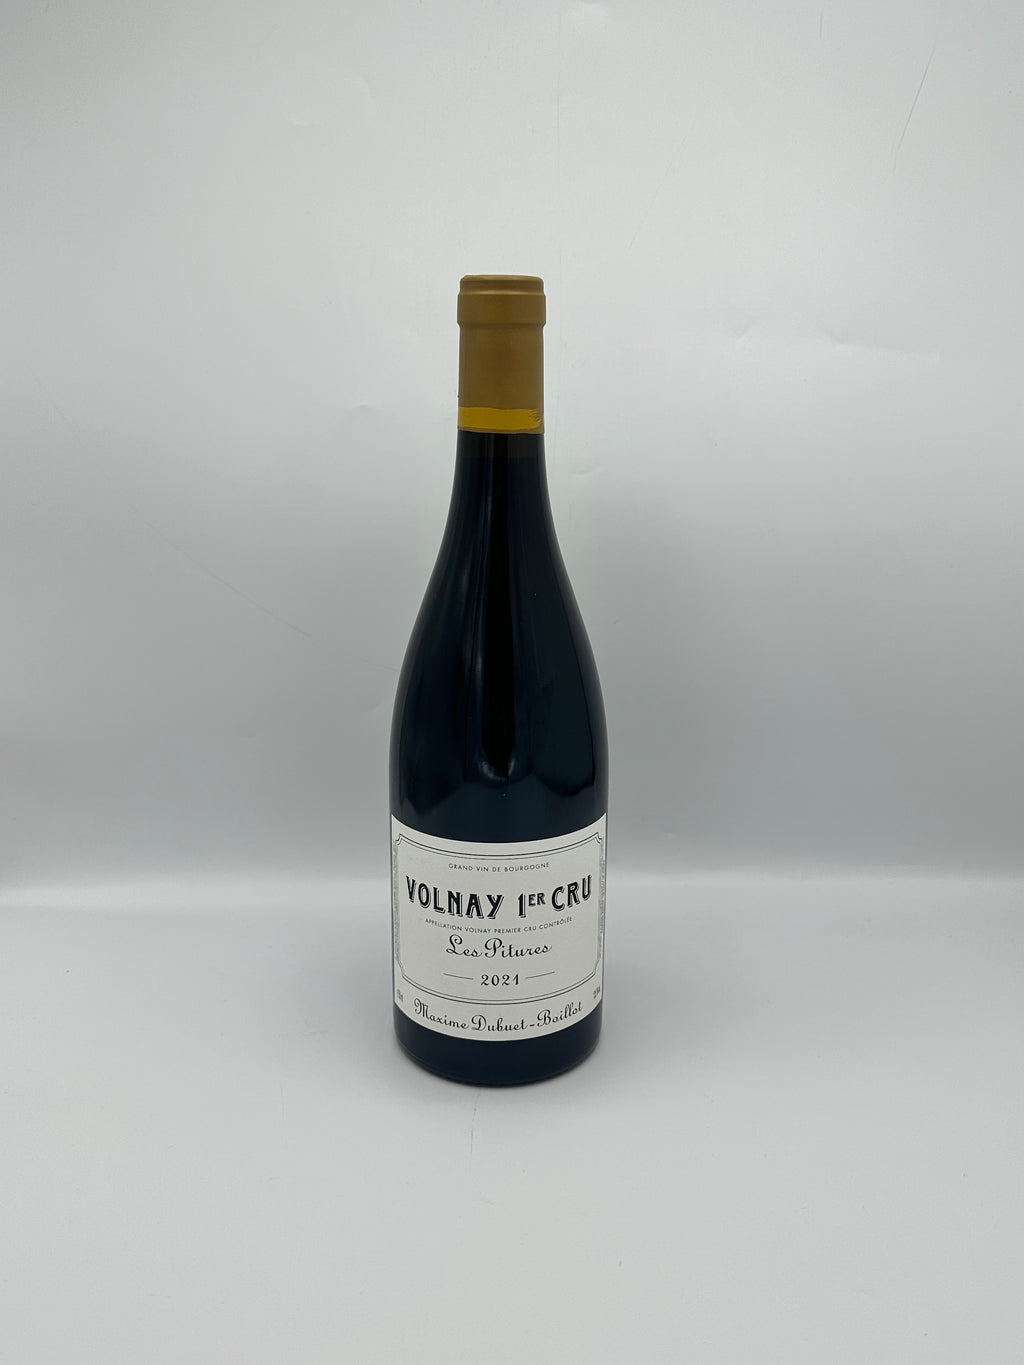 Volnay 1er Cru “Les Pitures” 2021 Red - Maxime Dubuet Boillot 